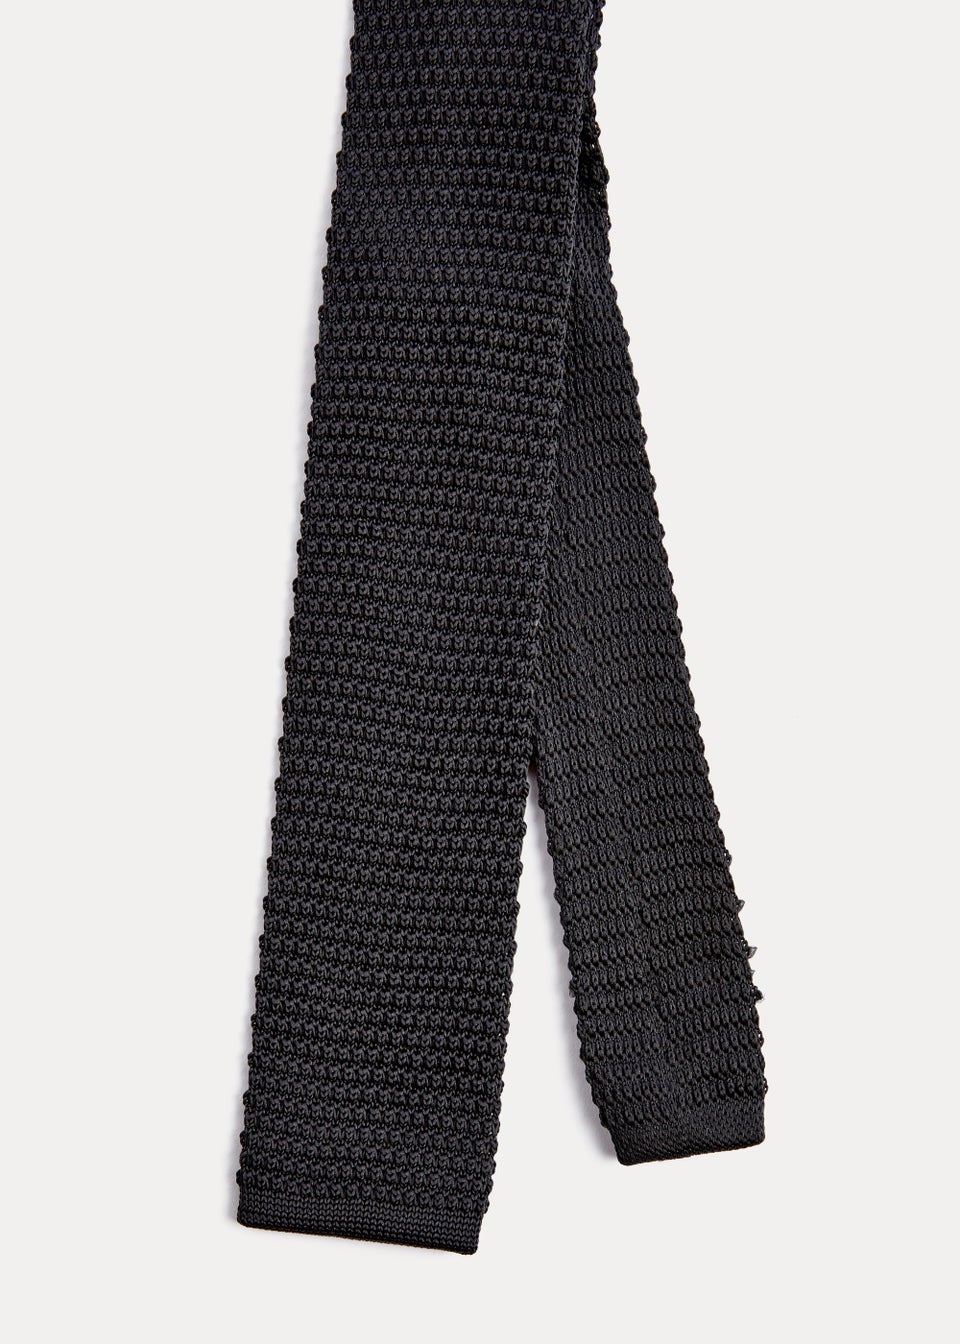 Taylor & Wright Black Knitted Tie - Matalan